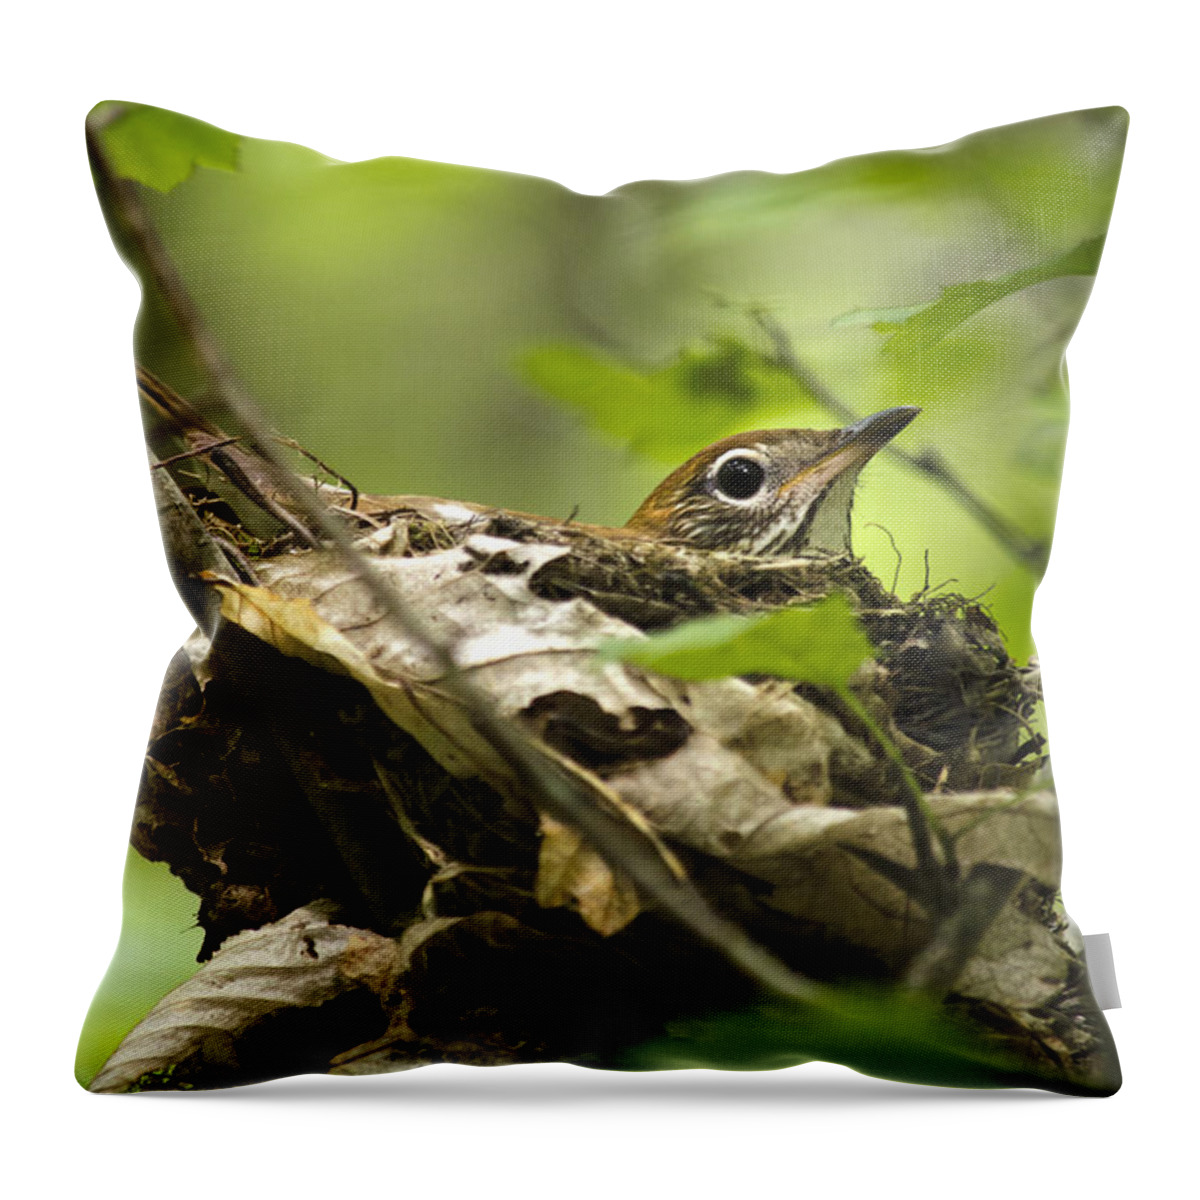 Wood Thrush Throw Pillow featuring the photograph Wood Thrush Nest by Christina Rollo